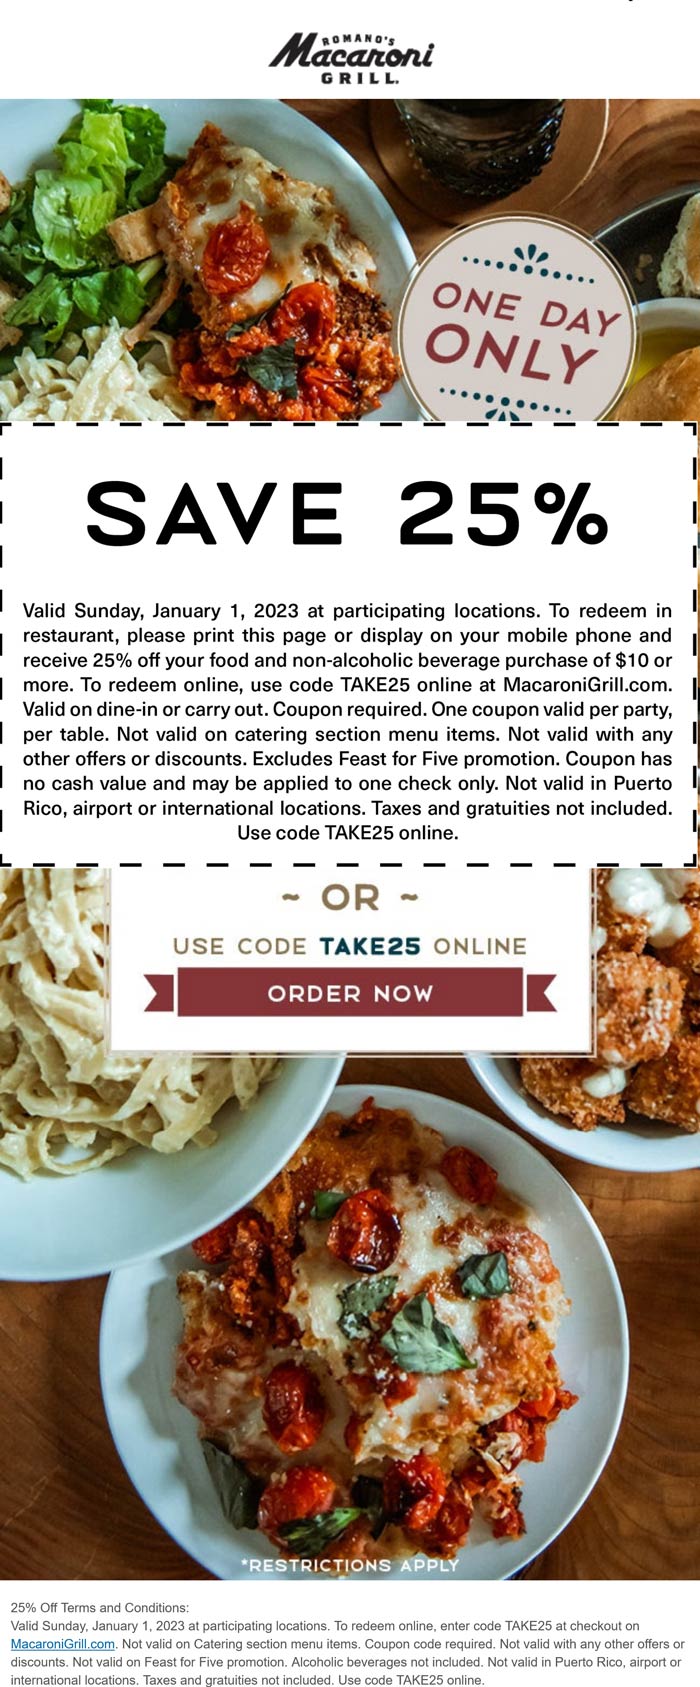 Macaroni Grill restaurants Coupon  25% off today at Macaroni Grill restaurants, or online via promo code TAKE25 #macaronigrill 